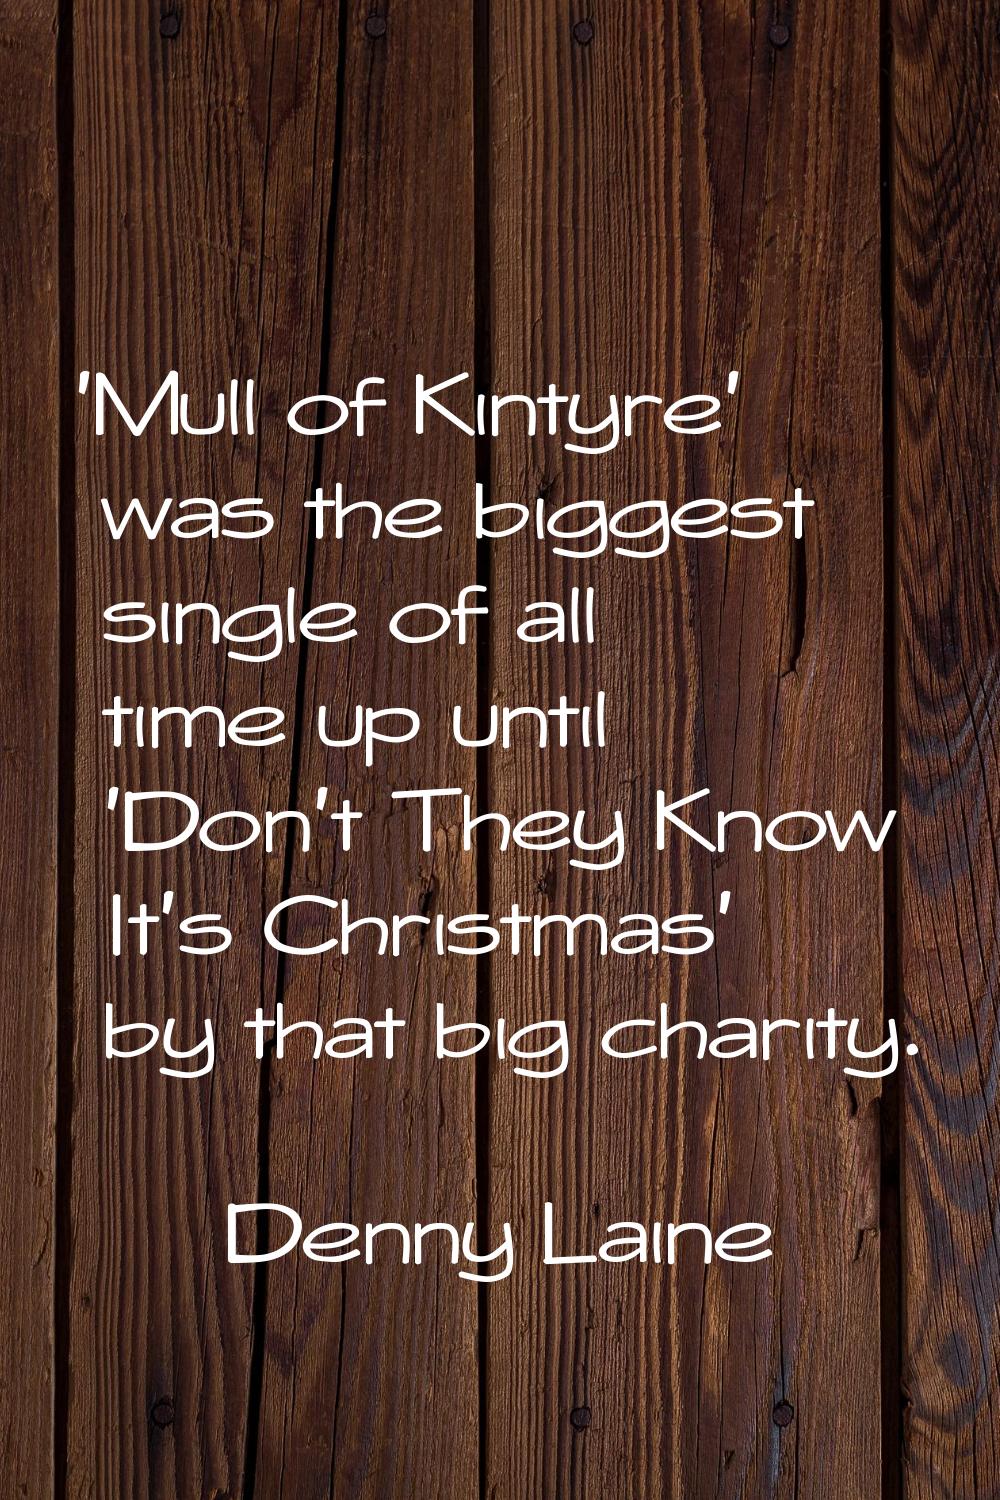 ‘Mull of Kintyre' was the biggest single of all time up until ‘Don't They Know It's Christmas' by t